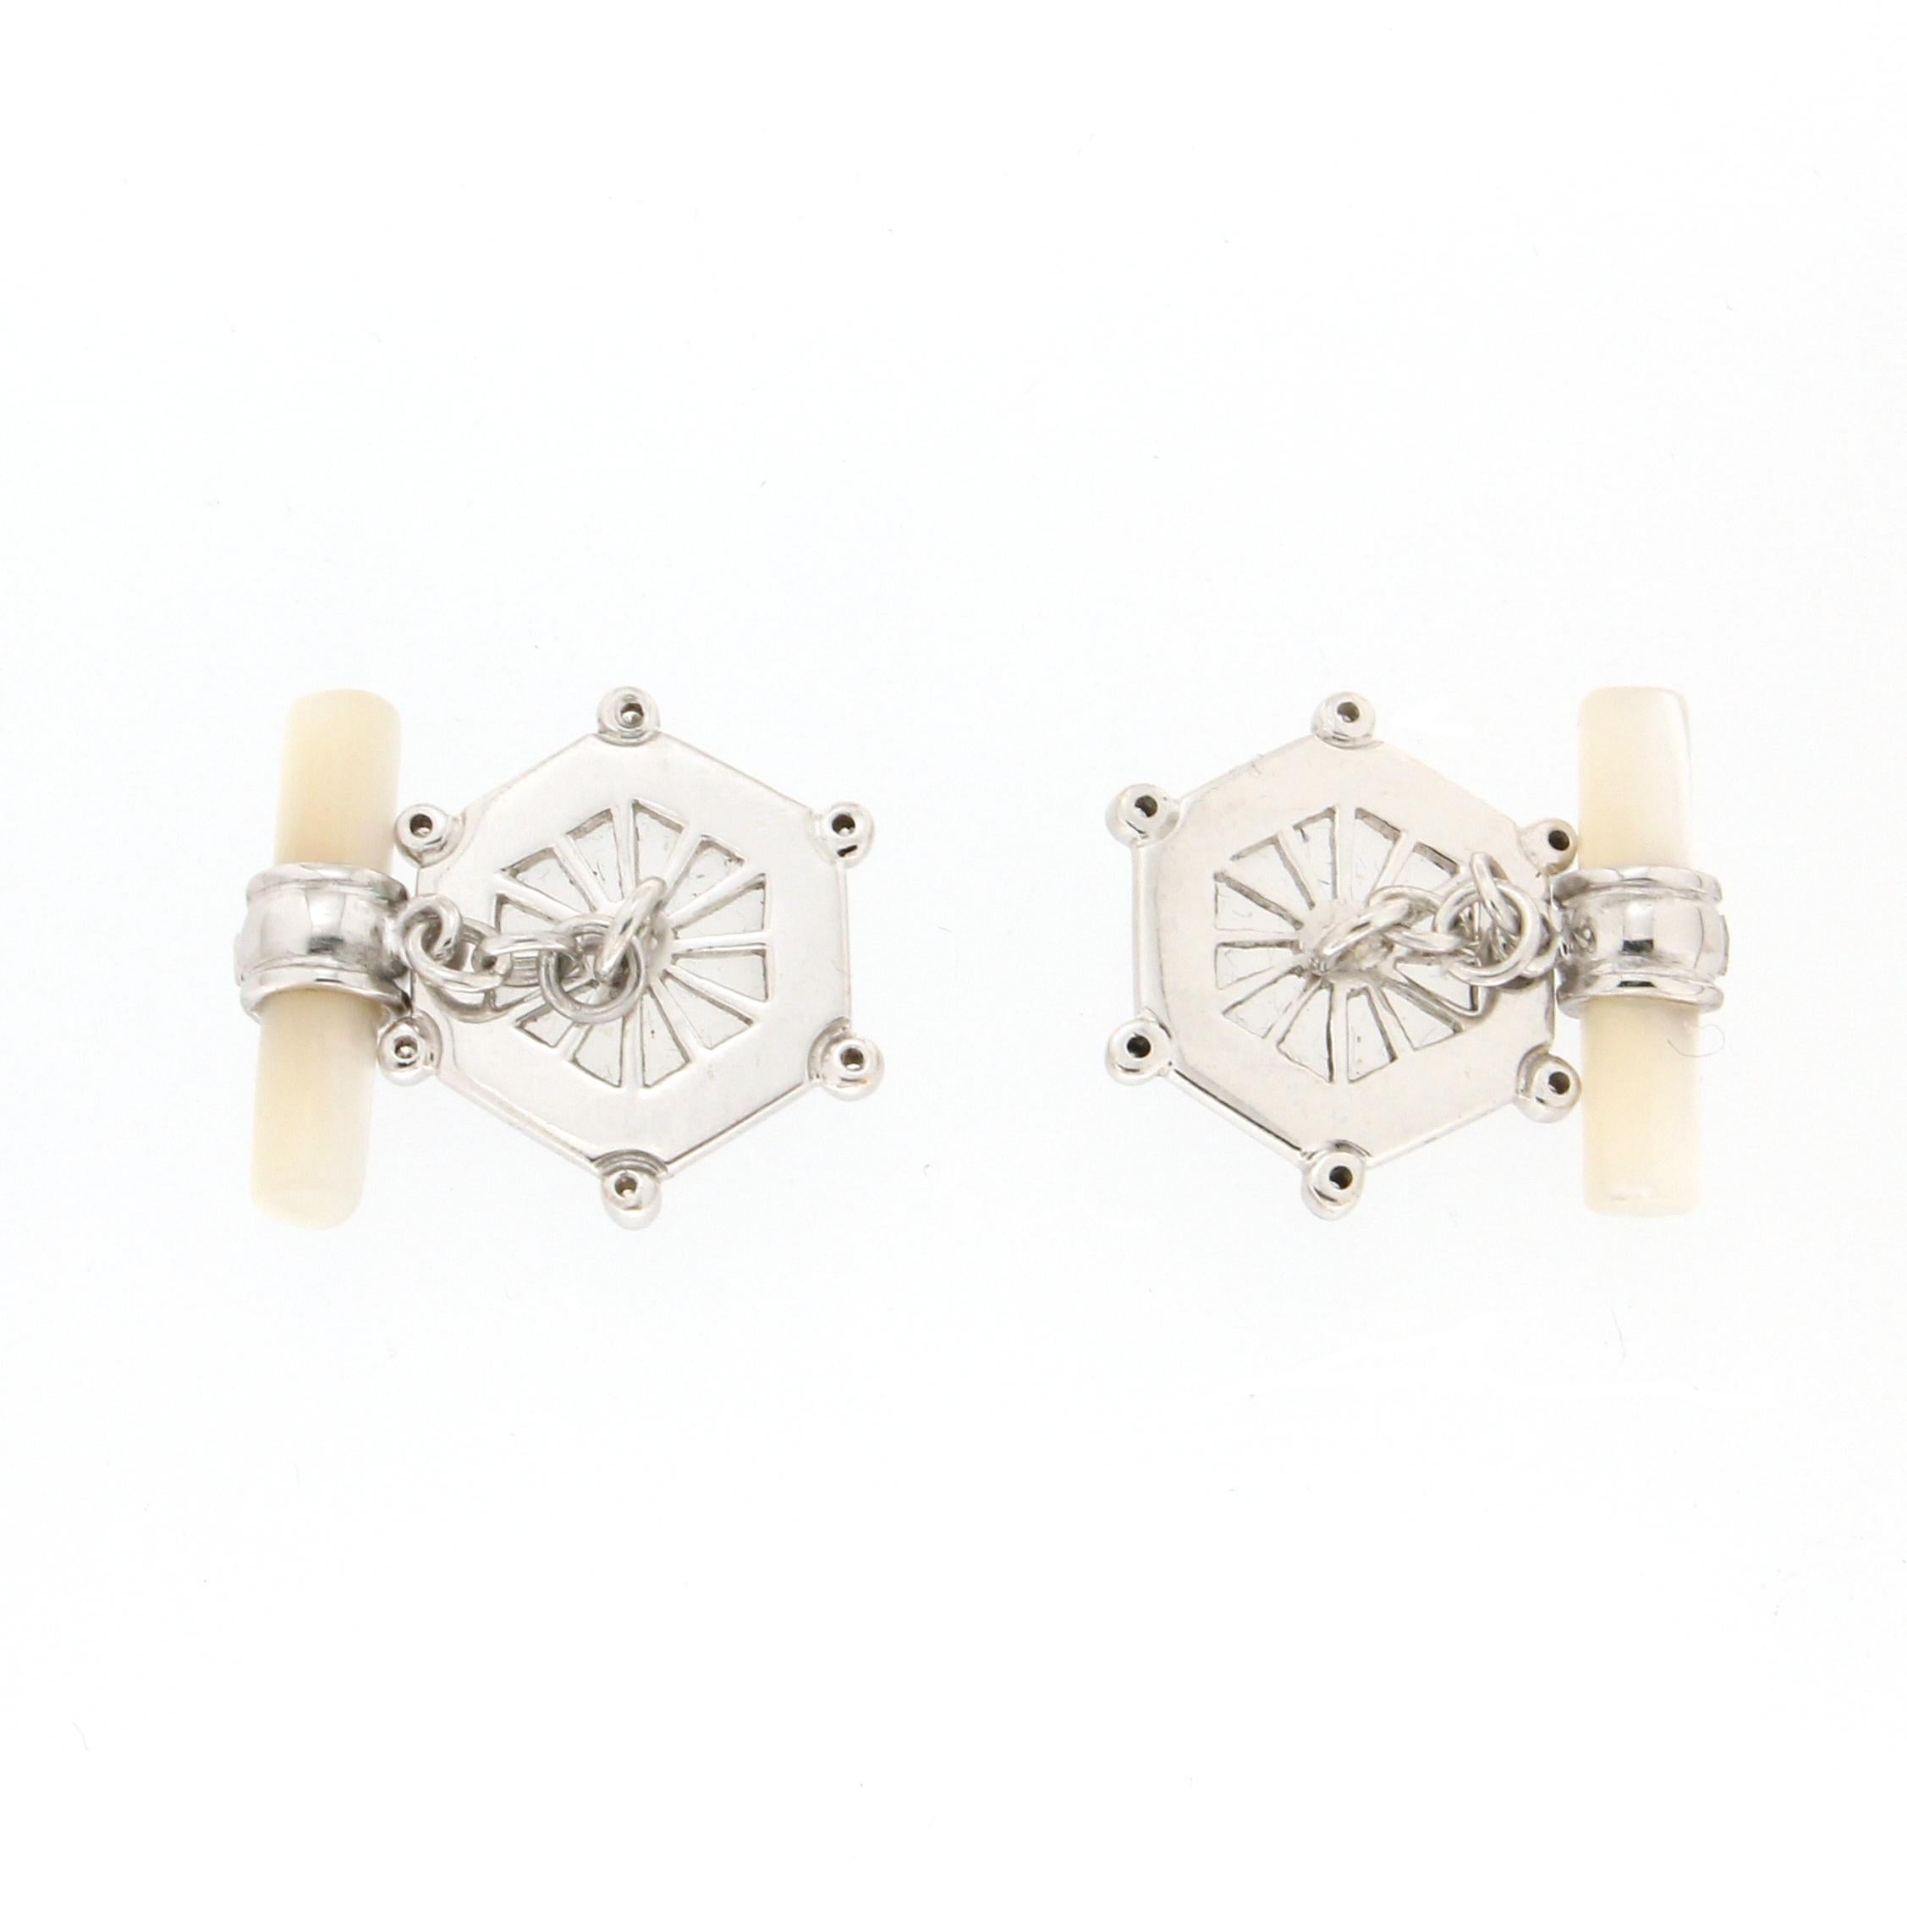 18 Karat white gold cufflinks. Handmade by our craftsmen and assembled with mother-of-pearls barrels,diamonds and rock crystal

Cufflinks total weight 11.40 grams
Diamonds weight 0.10 karat

